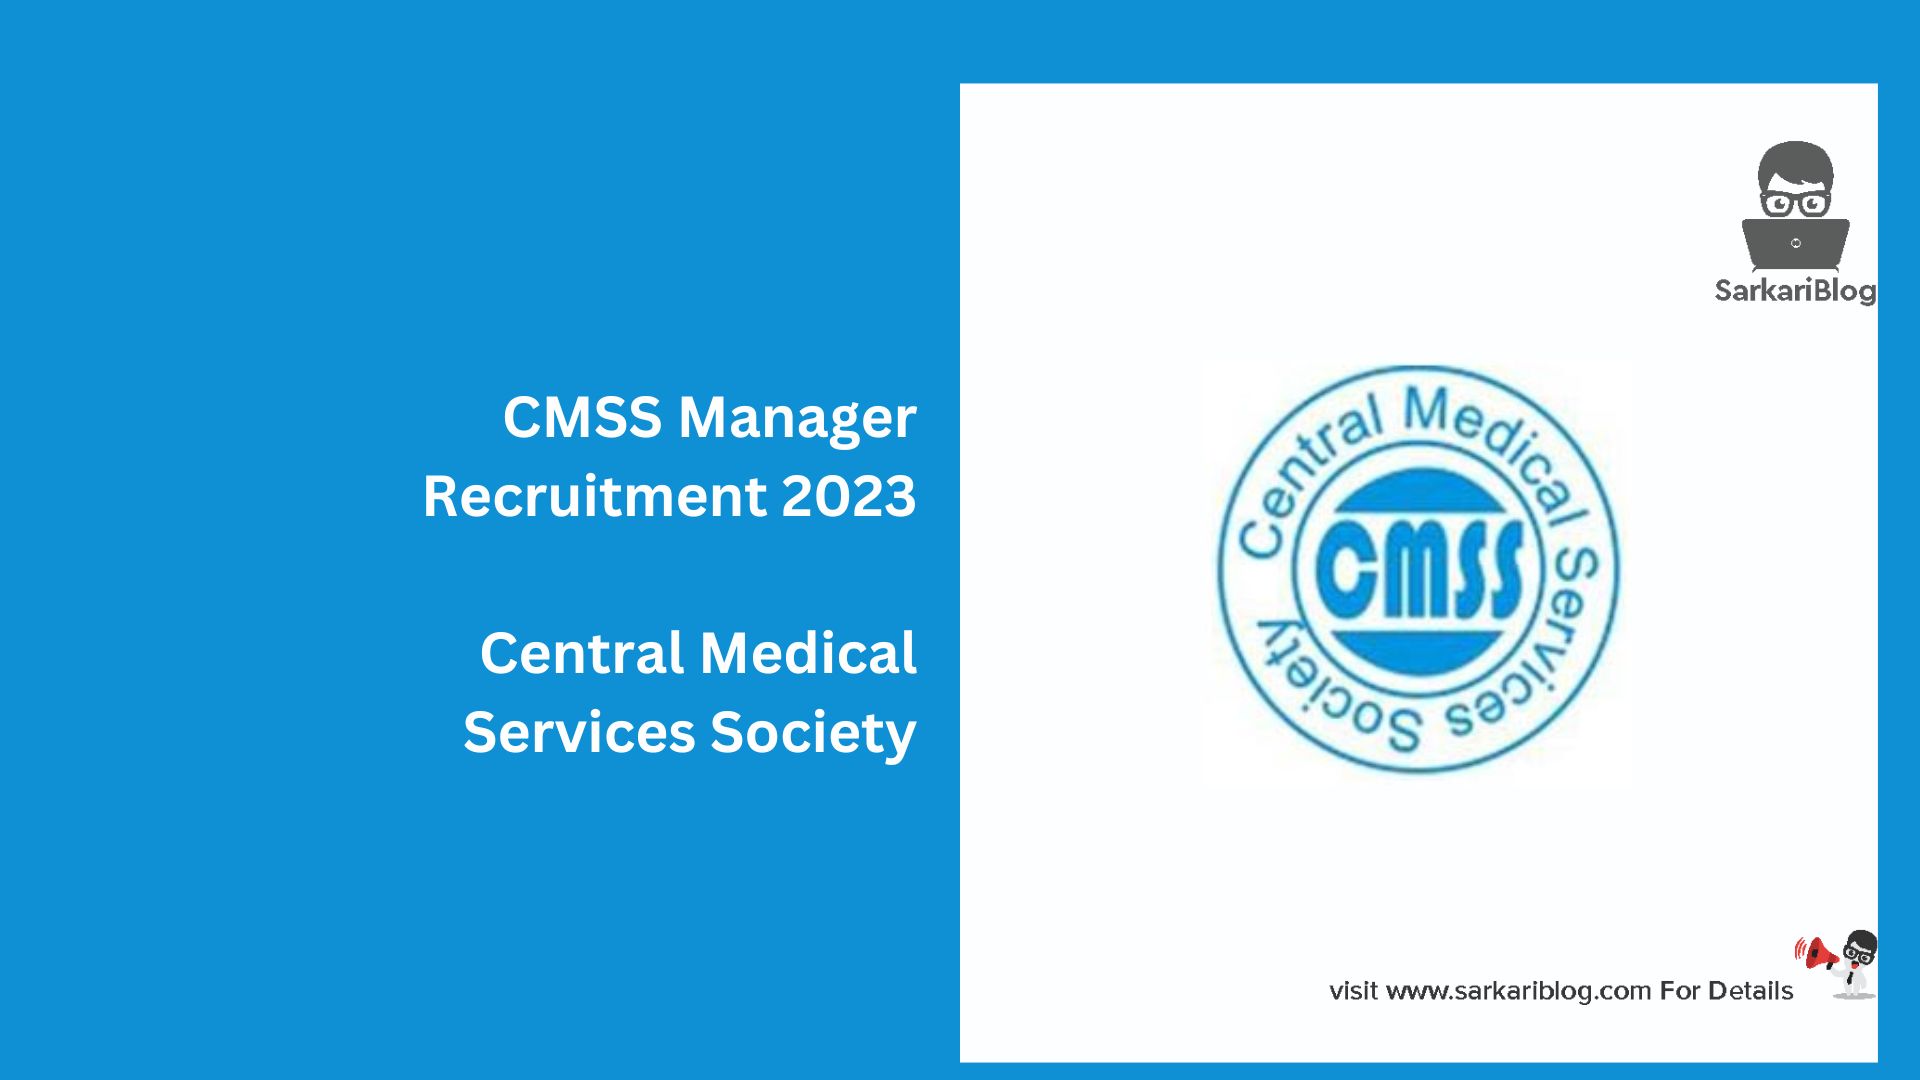 CMSS Manager Recruitment 2023